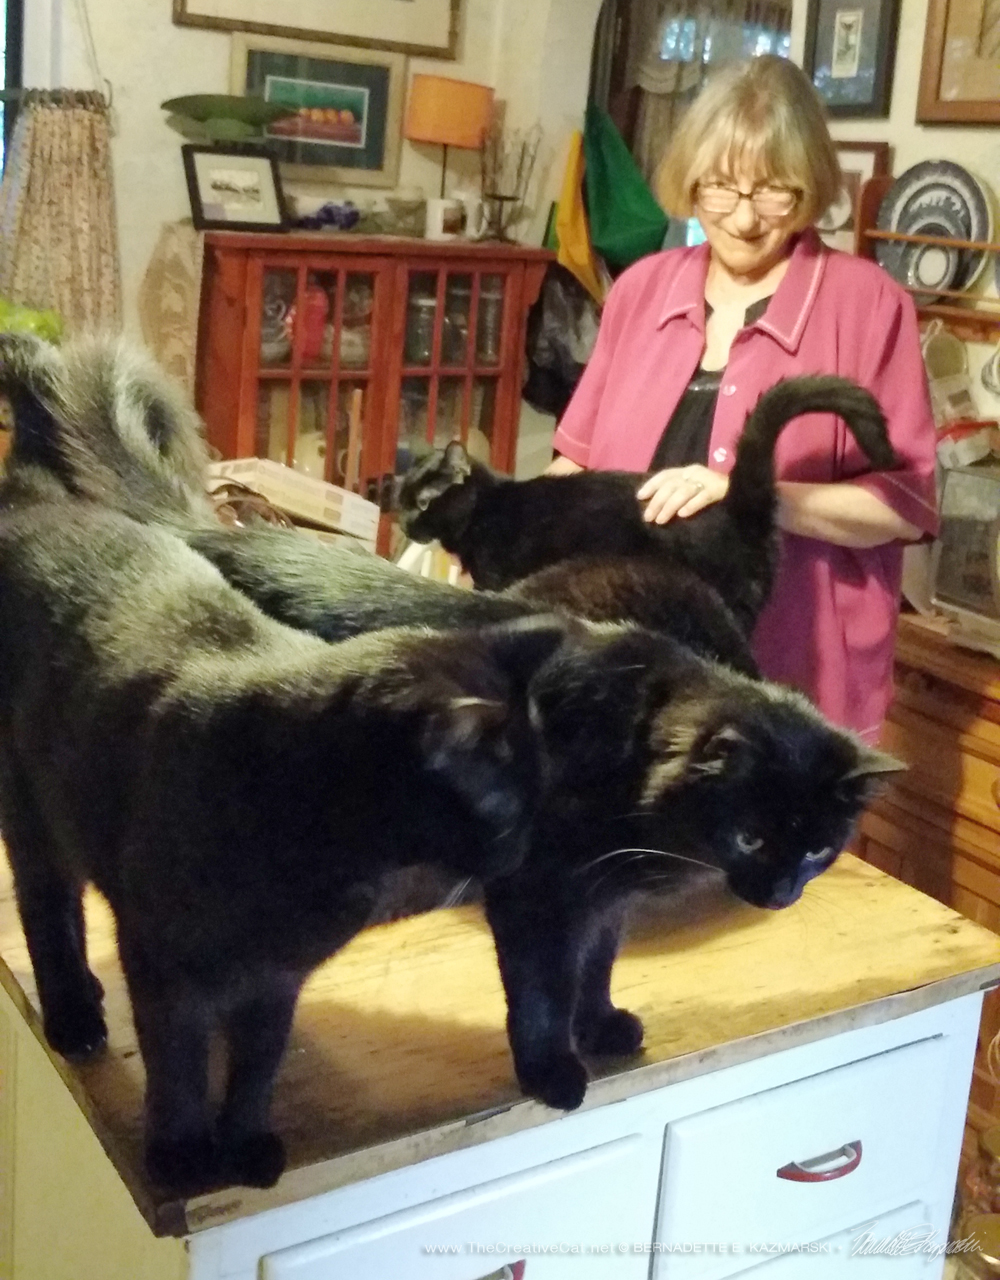 Maureen greets at least five of the black cats.